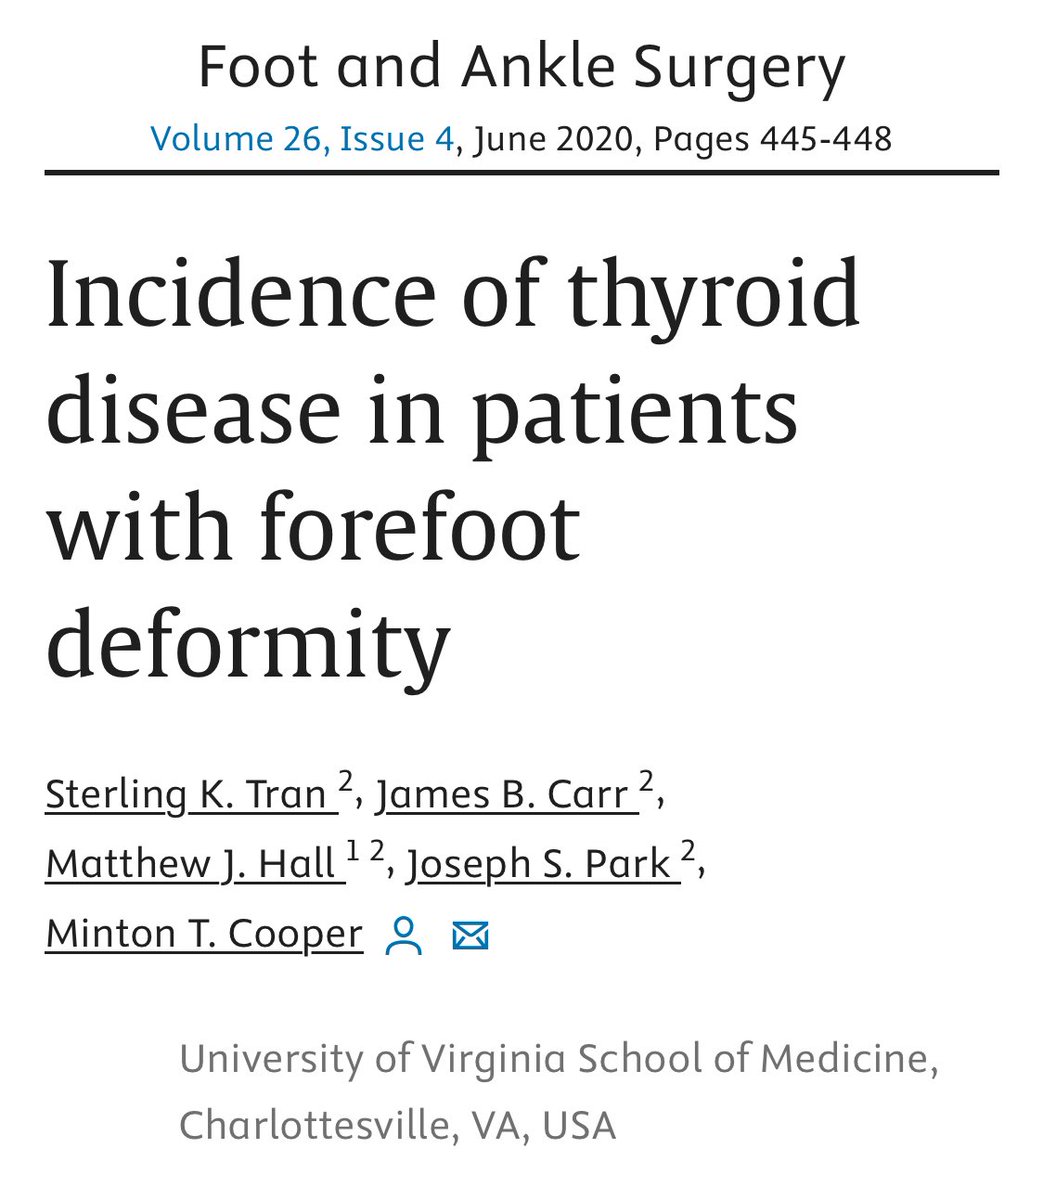 2019 University of Virginia study found thyroid disease is significantly associated with hallux valgus

The hallux metatarsophalangeal (big toe) joint matches the thyroid gland acupressure point….curious